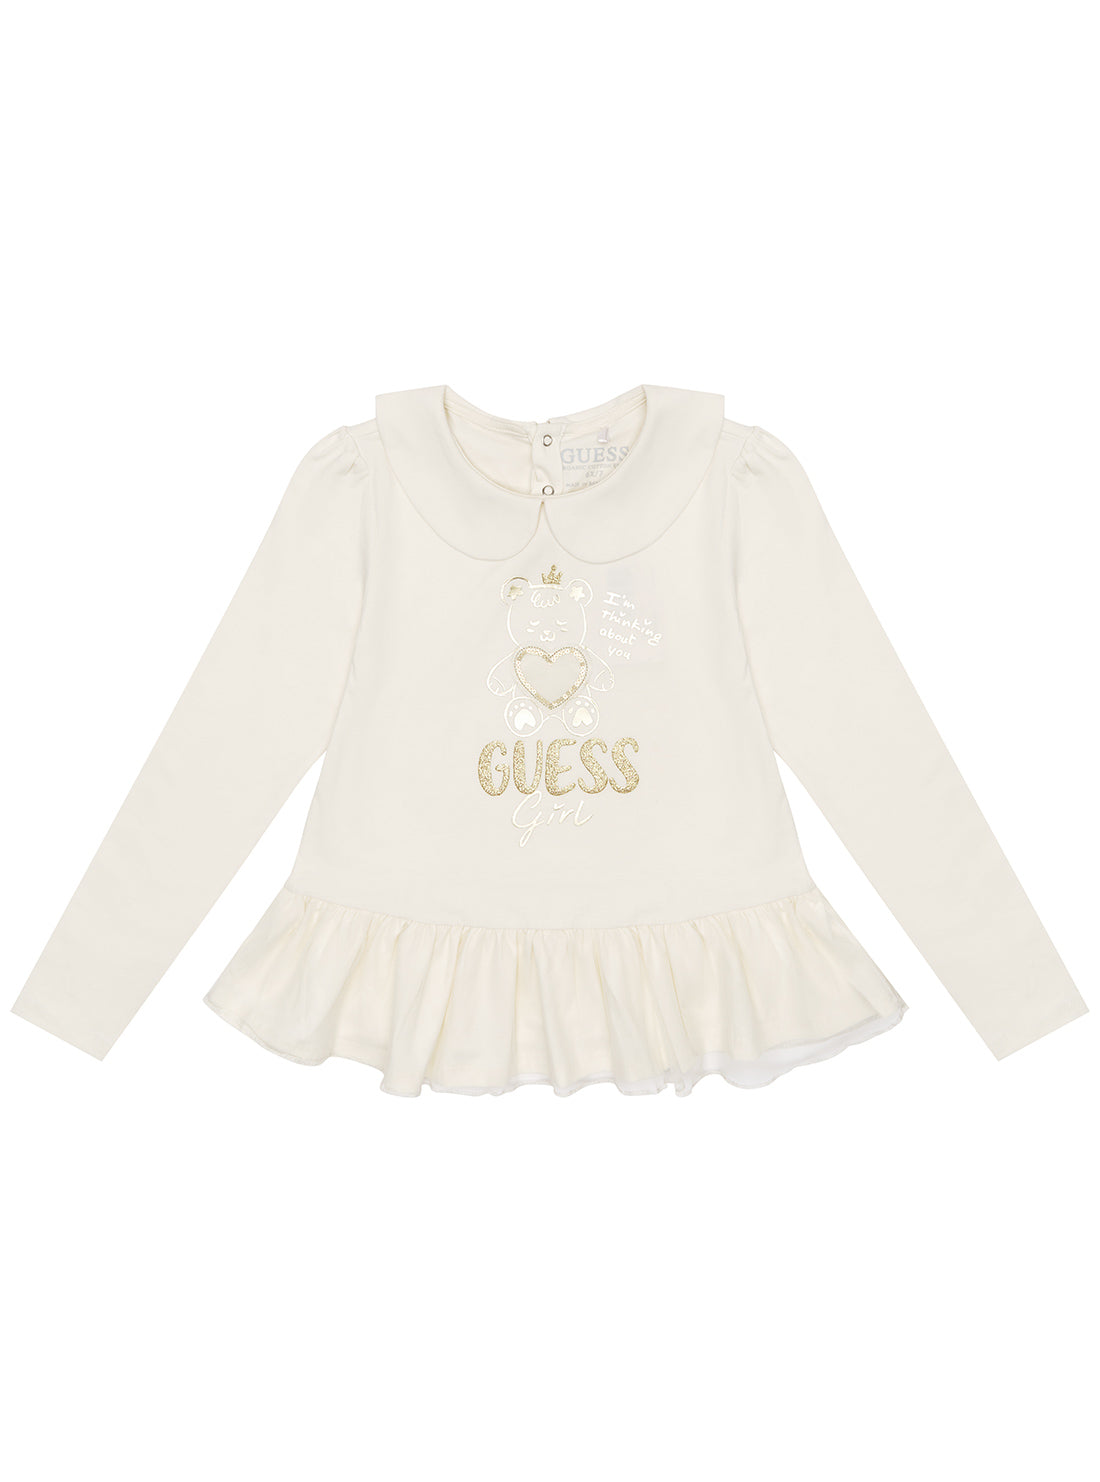 GUESS White Long Sleeves T-Shirt (2-7) front view